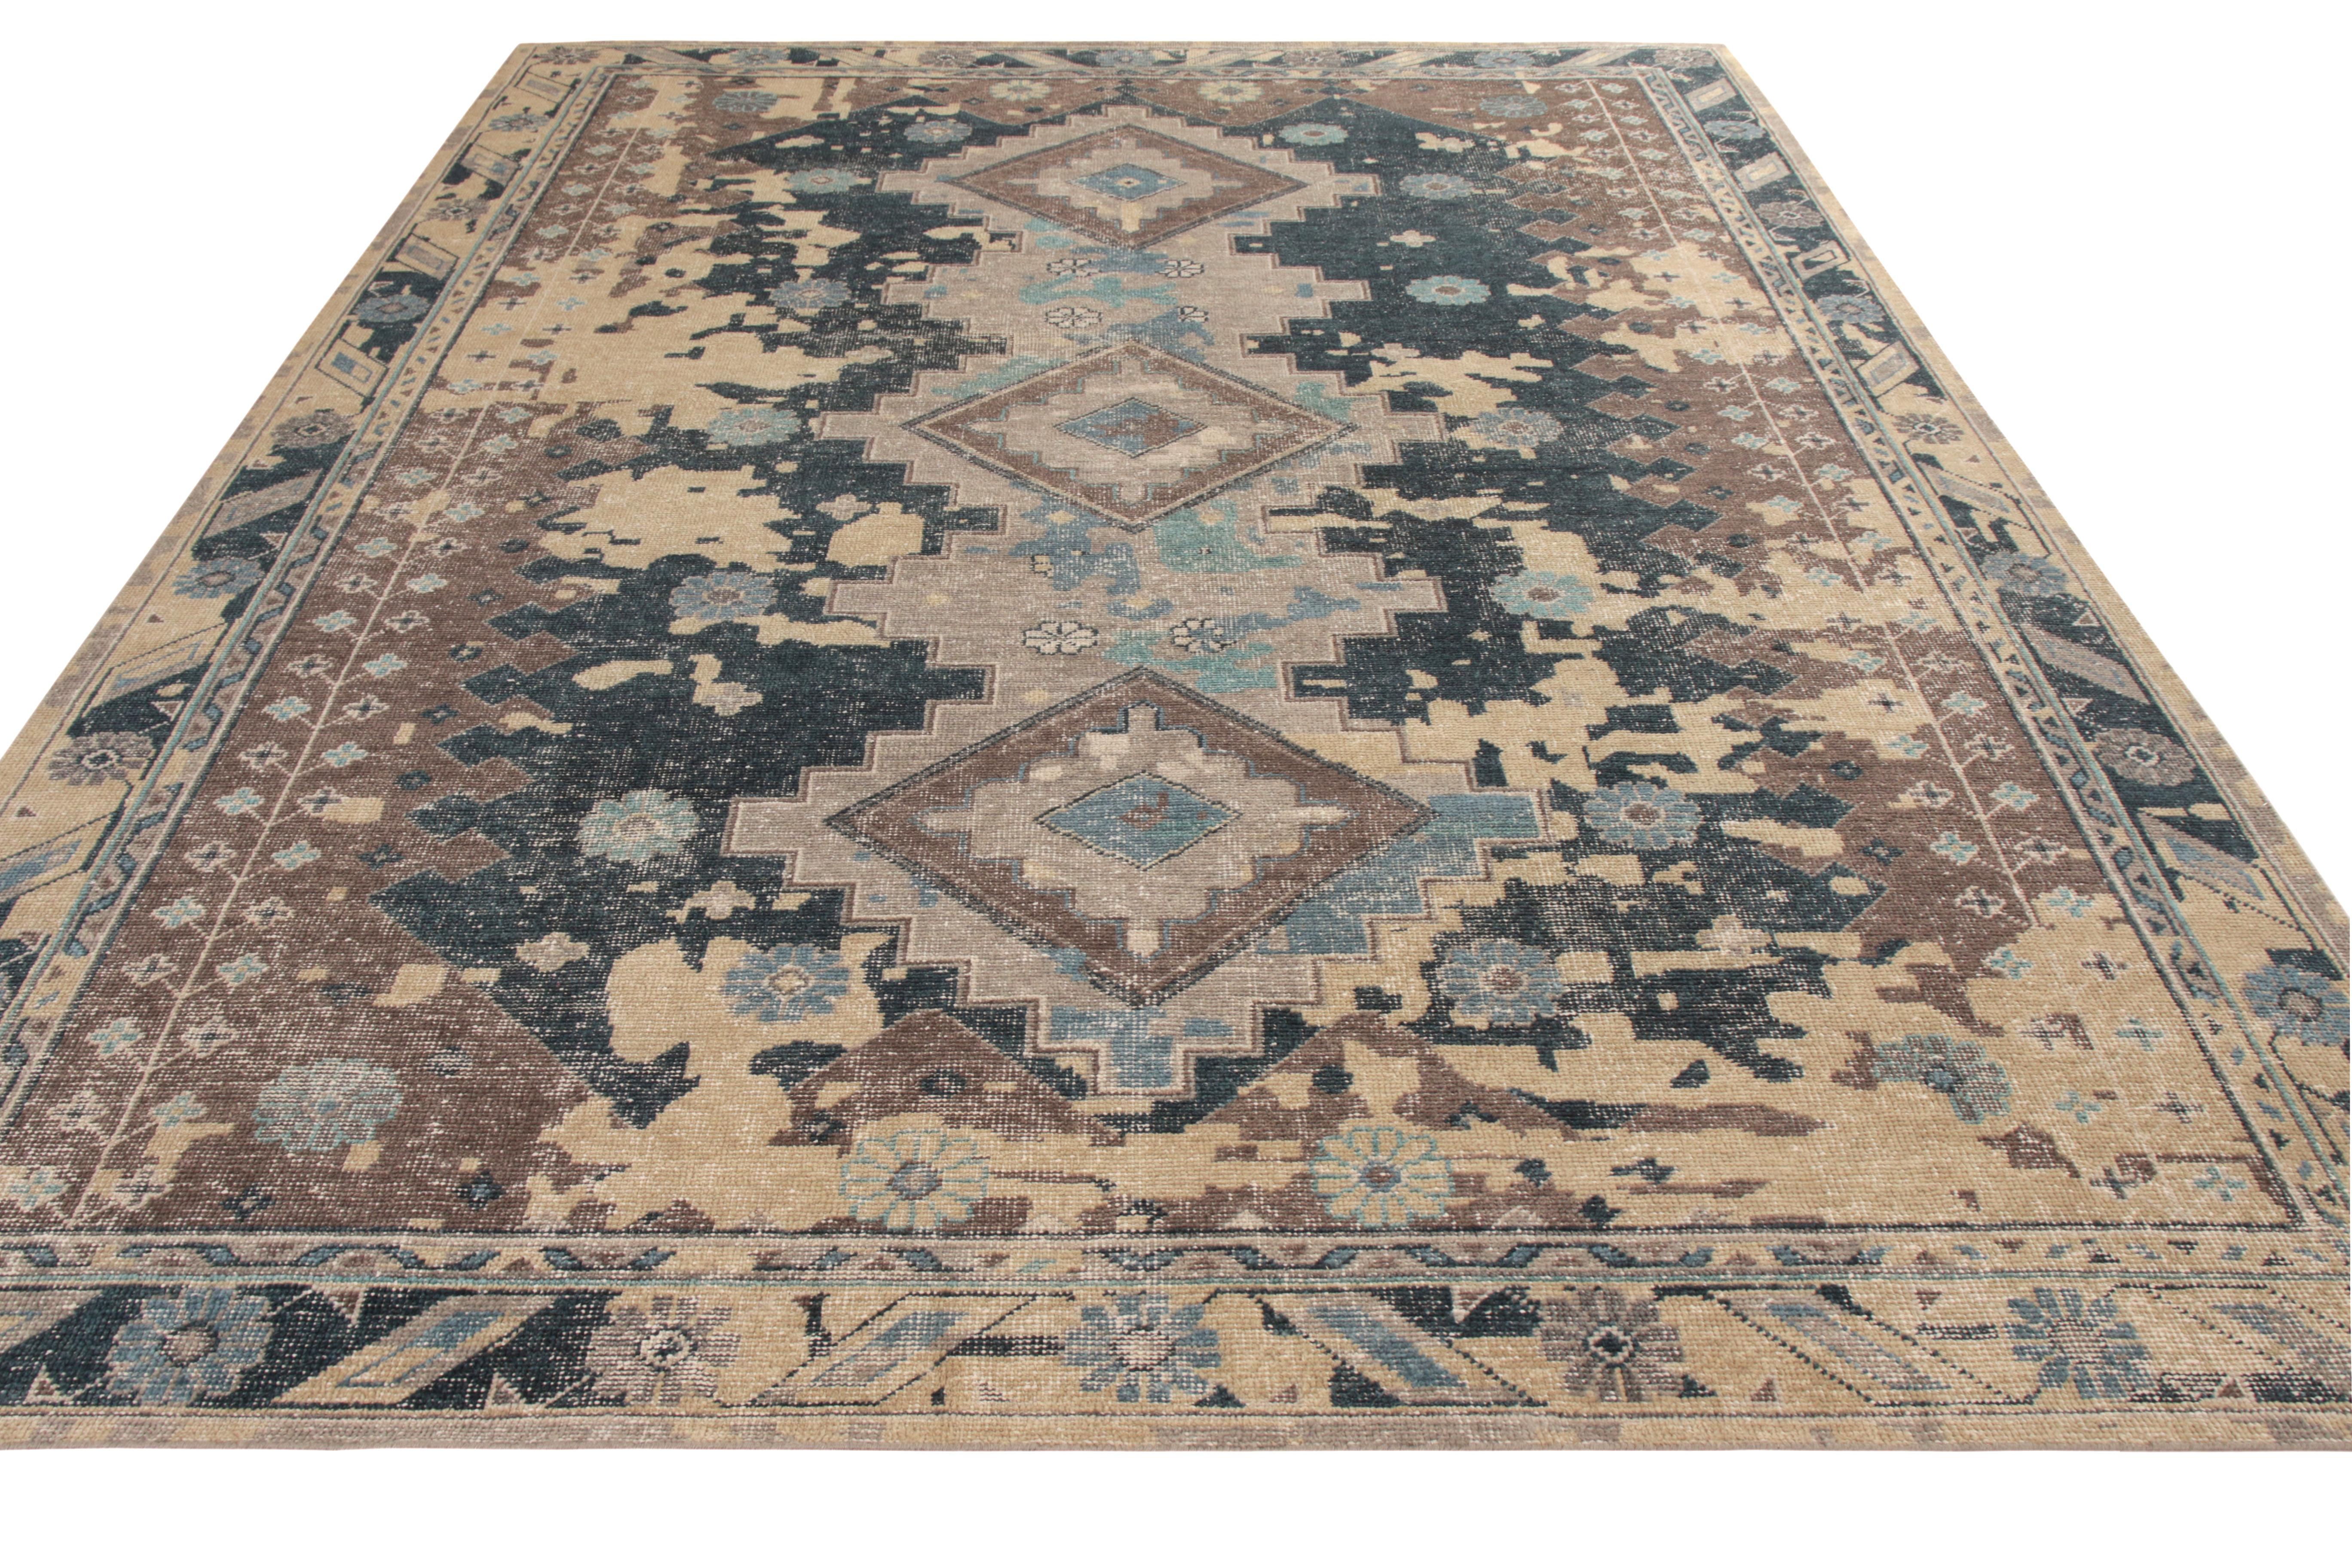 A 9 x 12 ode to classic rug styles in a modern take on distressed, shabby-chic texture, from Rug & Kilim’s Homage Collection. Hand knotted in wool, enjoying beige-brown and blue in a playful abstraction of medallion geometric patterns. An exemplary